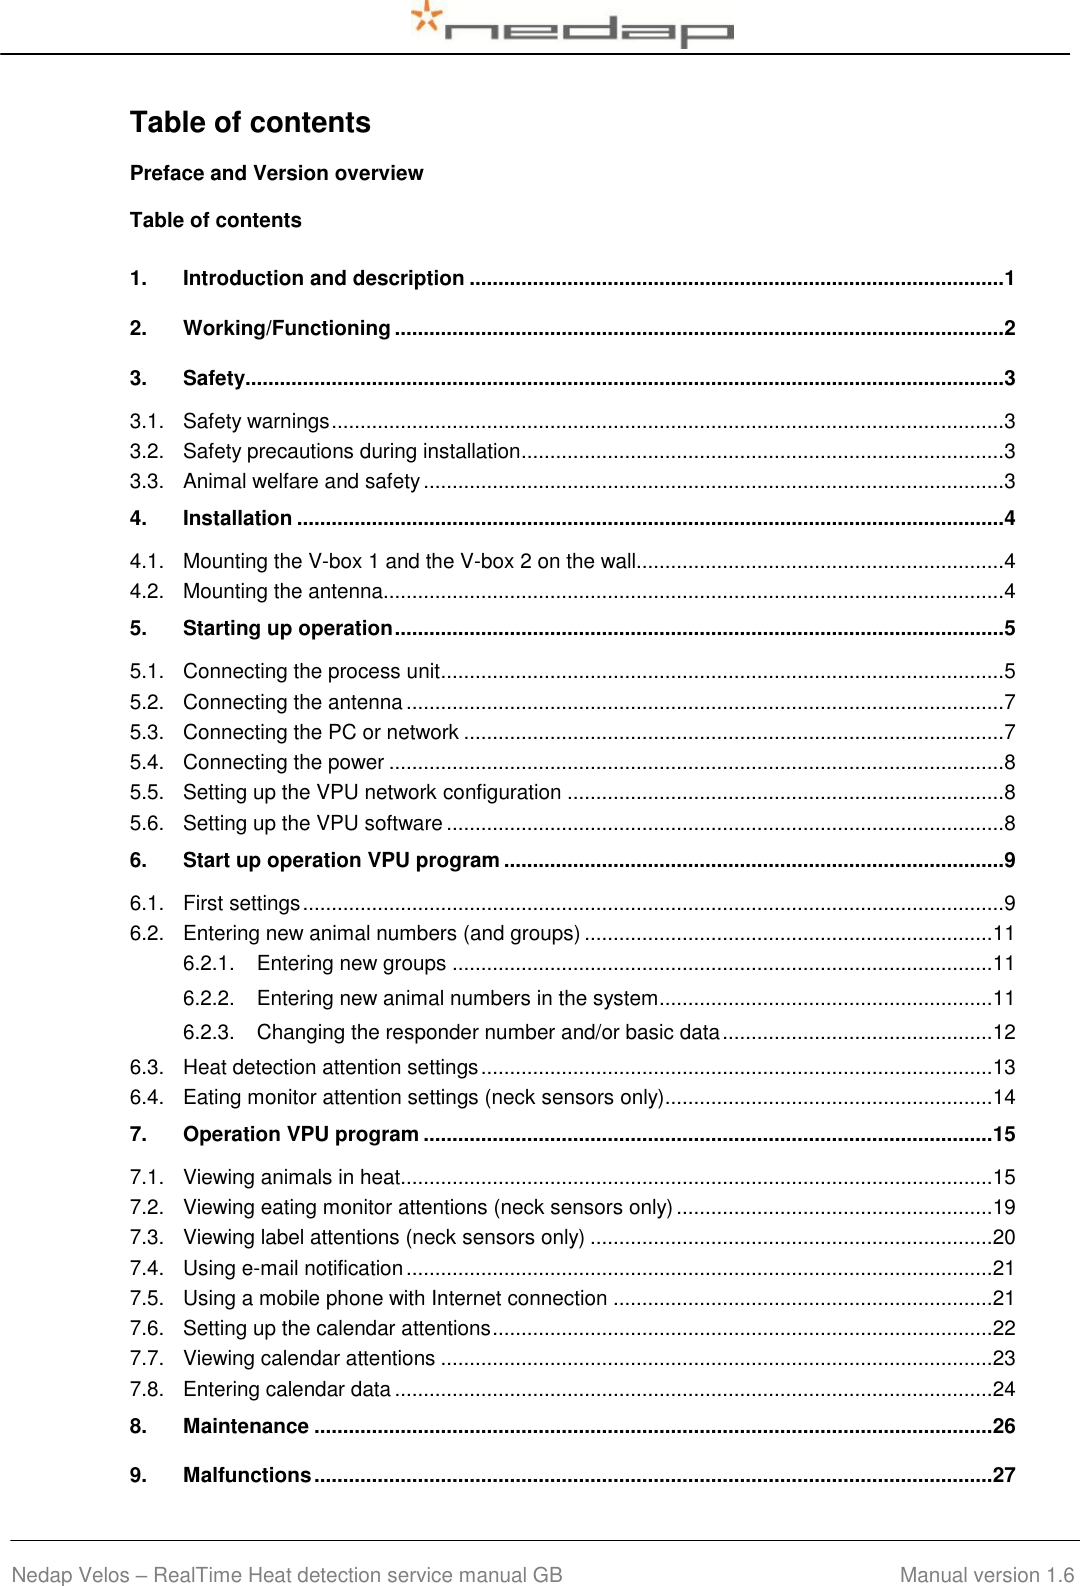  Nedap Velos – RealTime Heat detection service manual GB                                        Manual version 1.6 Table of contents Preface and Version overview Table of contents 1. Introduction and description ............................................................................................. 1 2. Working/Functioning .......................................................................................................... 2 3. Safety.................................................................................................................................... 3 3.1. Safety warnings ..................................................................................................................... 3 3.2. Safety precautions during installation .................................................................................... 3 3.3. Animal welfare and safety ..................................................................................................... 3 4. Installation ........................................................................................................................... 4 4.1. Mounting the V-box 1 and the V-box 2 on the wall................................................................ 4 4.2. Mounting the antenna............................................................................................................ 4 5. Starting up operation .......................................................................................................... 5 5.1. Connecting the process unit .................................................................................................. 5 5.2. Connecting the antenna ........................................................................................................ 7 5.3. Connecting the PC or network .............................................................................................. 7 5.4. Connecting the power ........................................................................................................... 8 5.5. Setting up the VPU network configuration ............................................................................ 8 5.6. Setting up the VPU software ................................................................................................. 8 6. Start up operation VPU program ....................................................................................... 9 6.1. First settings .......................................................................................................................... 9 6.2. Entering new animal numbers (and groups) ....................................................................... 11 6.2.1. Entering new groups .............................................................................................. 11 6.2.2. Entering new animal numbers in the system.......................................................... 11 6.2.3. Changing the responder number and/or basic data ............................................... 12 6.3. Heat detection attention settings ......................................................................................... 13 6.4. Eating monitor attention settings (neck sensors only)......................................................... 14 7. Operation VPU program ................................................................................................... 15 7.1. Viewing animals in heat....................................................................................................... 15 7.2. Viewing eating monitor attentions (neck sensors only) ....................................................... 19 7.3. Viewing label attentions (neck sensors only) ...................................................................... 20 7.4. Using e-mail notification ...................................................................................................... 21 7.5. Using a mobile phone with Internet connection .................................................................. 21 7.6. Setting up the calendar attentions ....................................................................................... 22 7.7. Viewing calendar attentions ................................................................................................ 23 7.8. Entering calendar data ........................................................................................................ 24 8. Maintenance ...................................................................................................................... 26 9. Malfunctions ...................................................................................................................... 27 